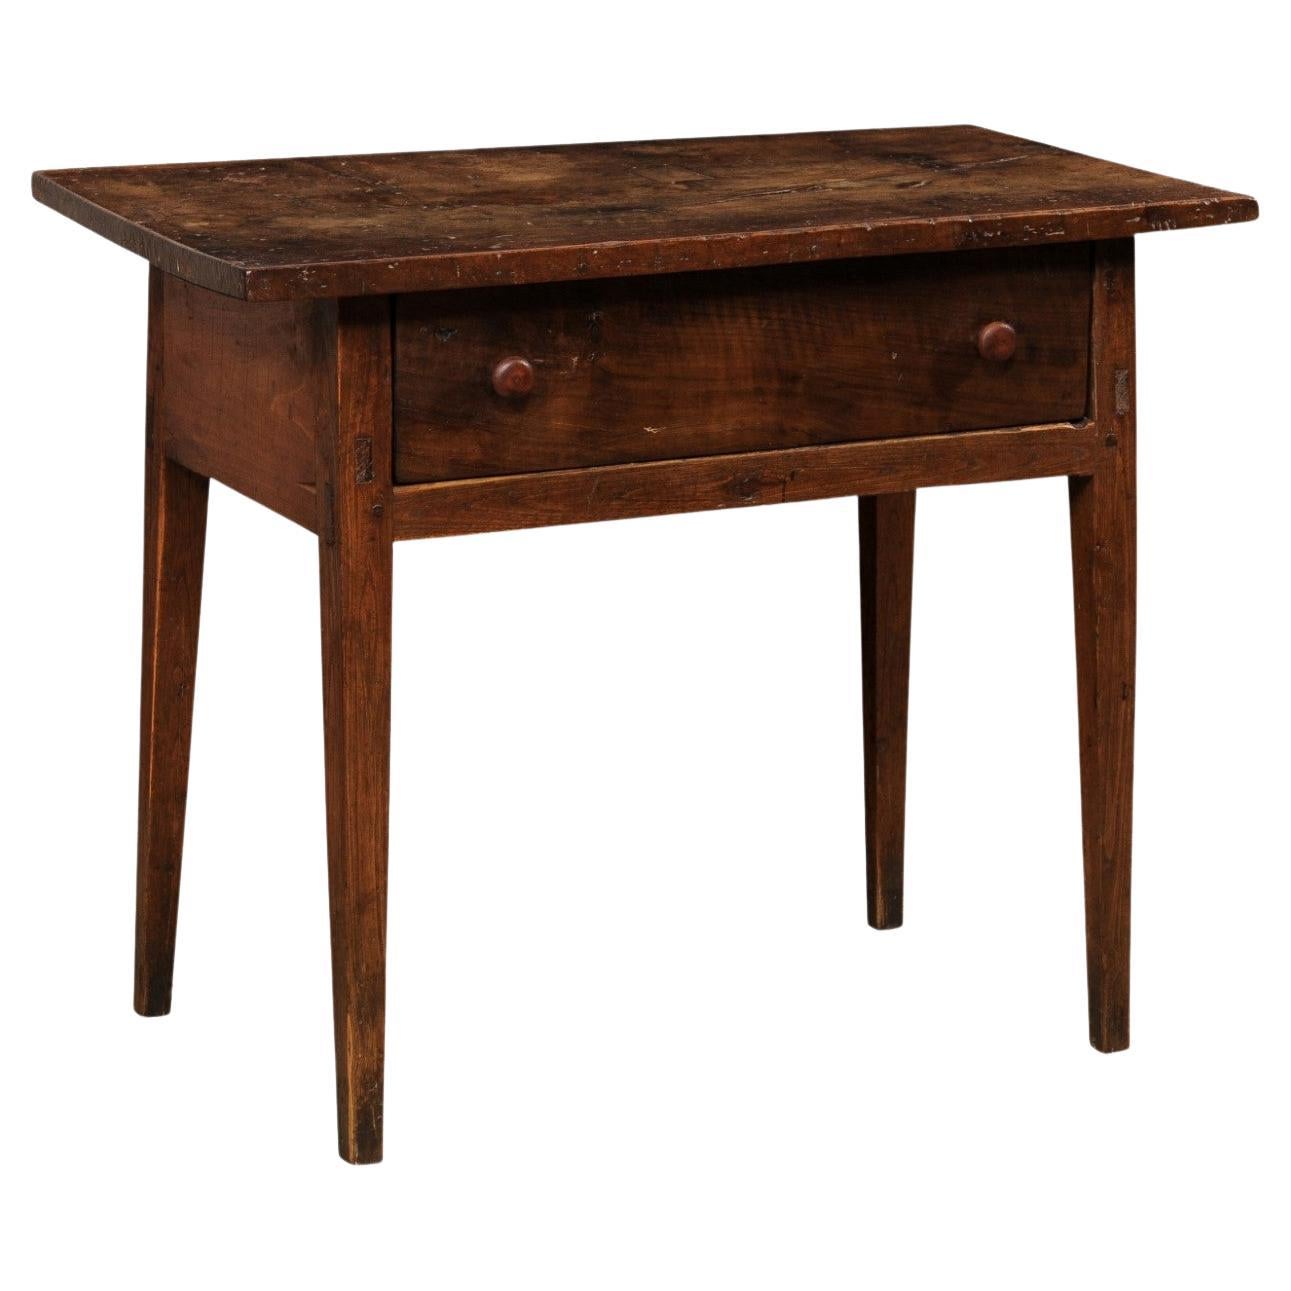 18th C. Spanish Carved-Walnut Table w/Drawer (Top has Fabulous Old Patina!)